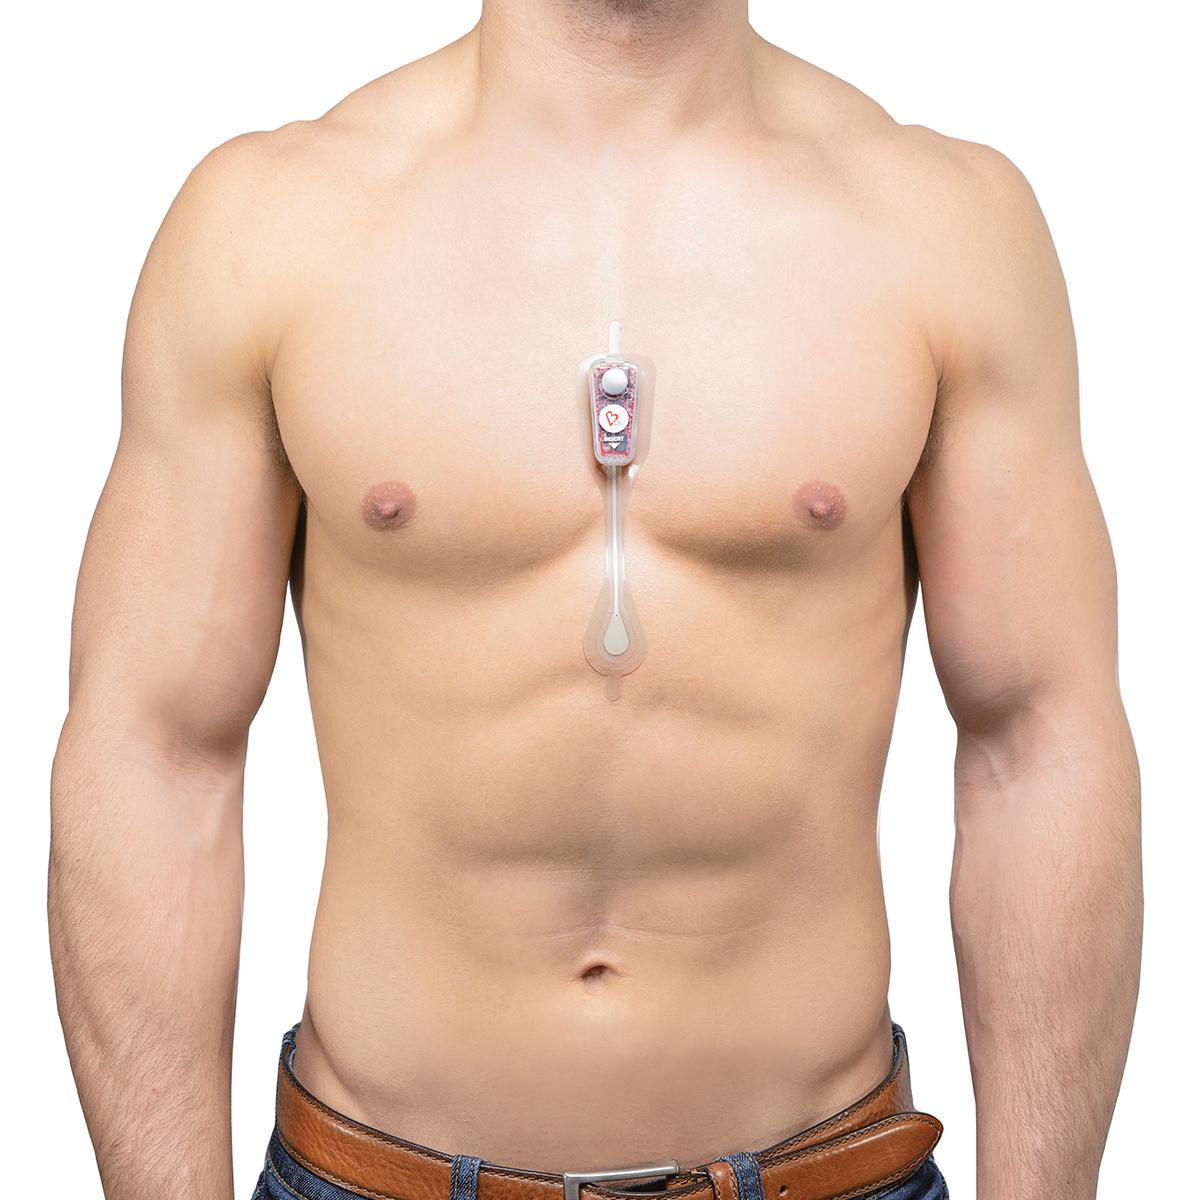 patient with device on chest